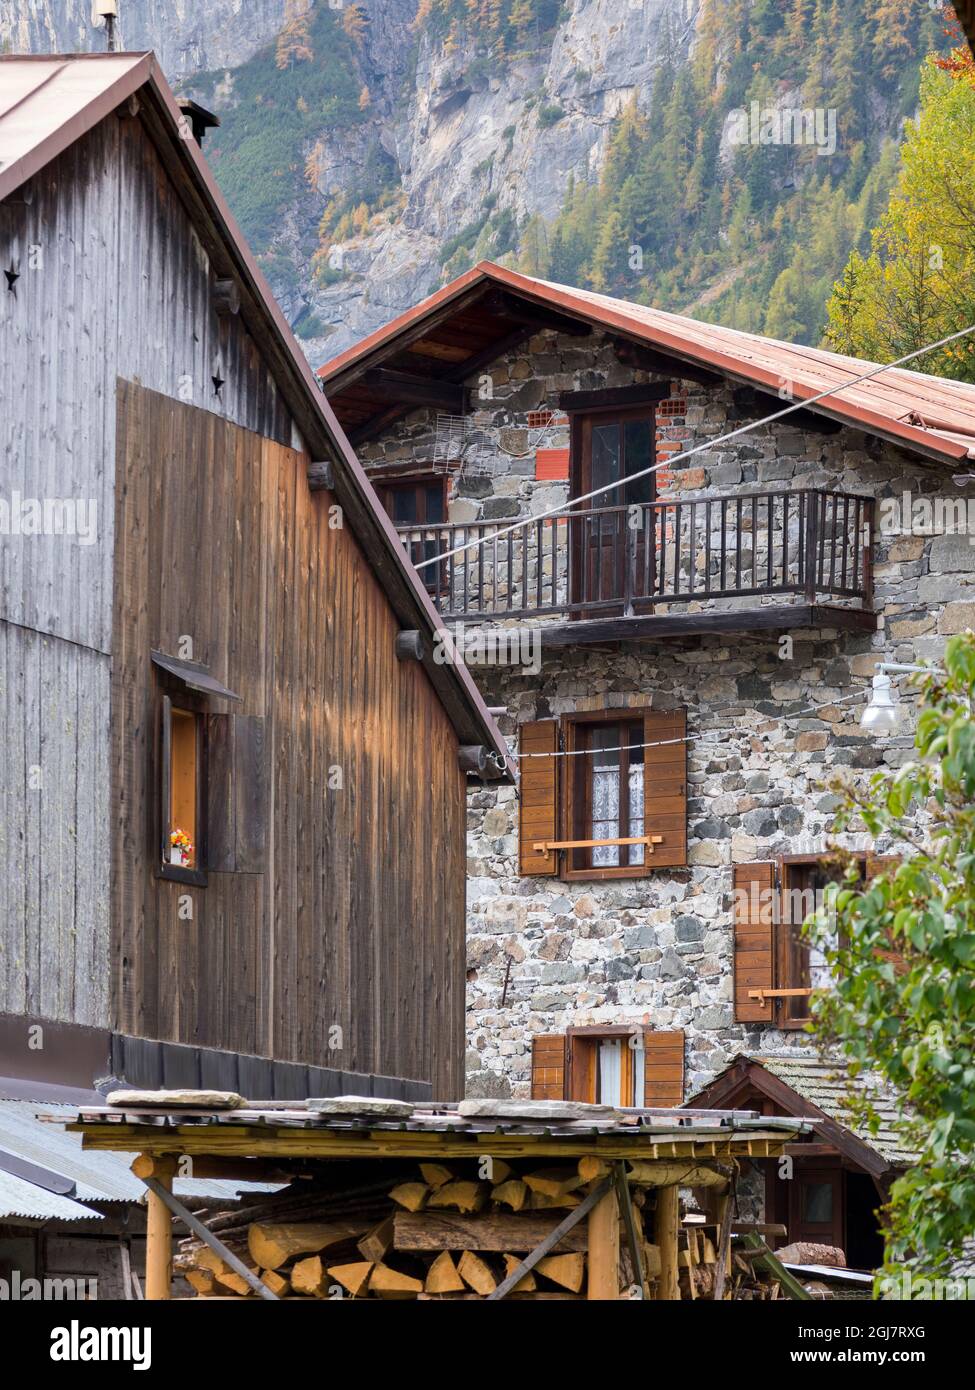 Village Gares, traditional alpine architecture in valley Valle di Gares, Pale di San Martino. Pala is part of the UNESCO World Heritage Site, Dolomite Stock Photo